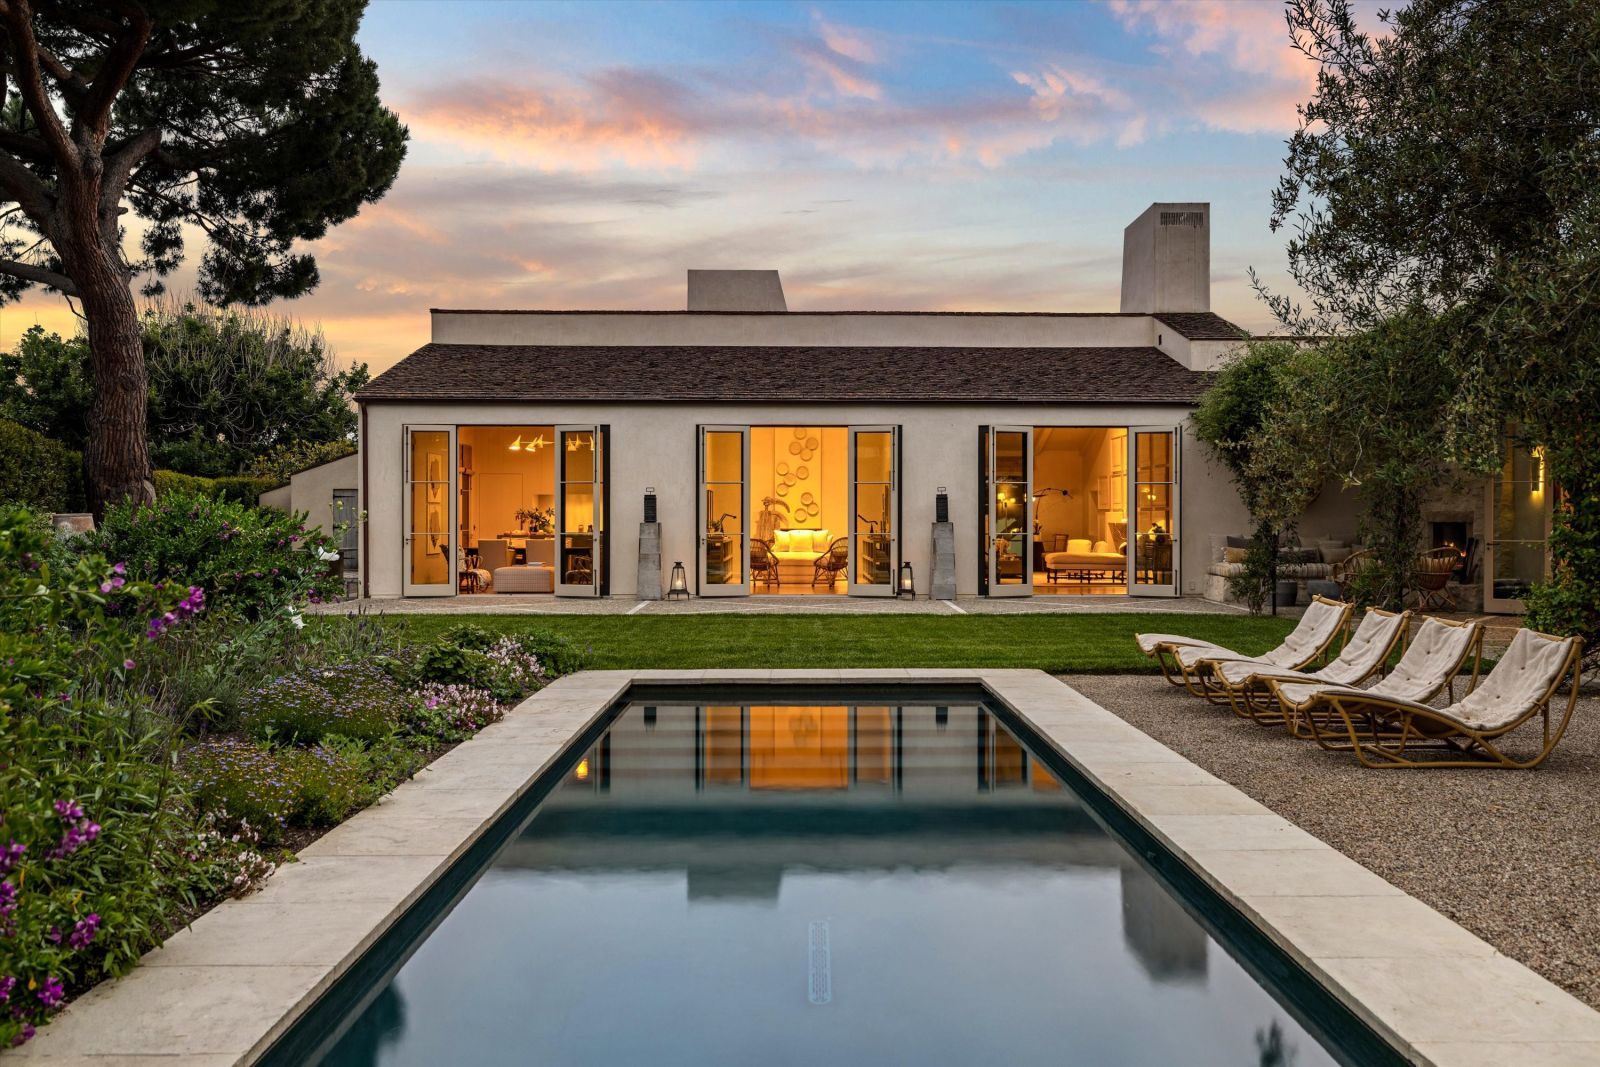 Backyard of Suzanne Rheinstein's Montecito home with a lap pool, 4 lounge chairs and the home in the background, its floor-to-ceiling windows illuminated from within